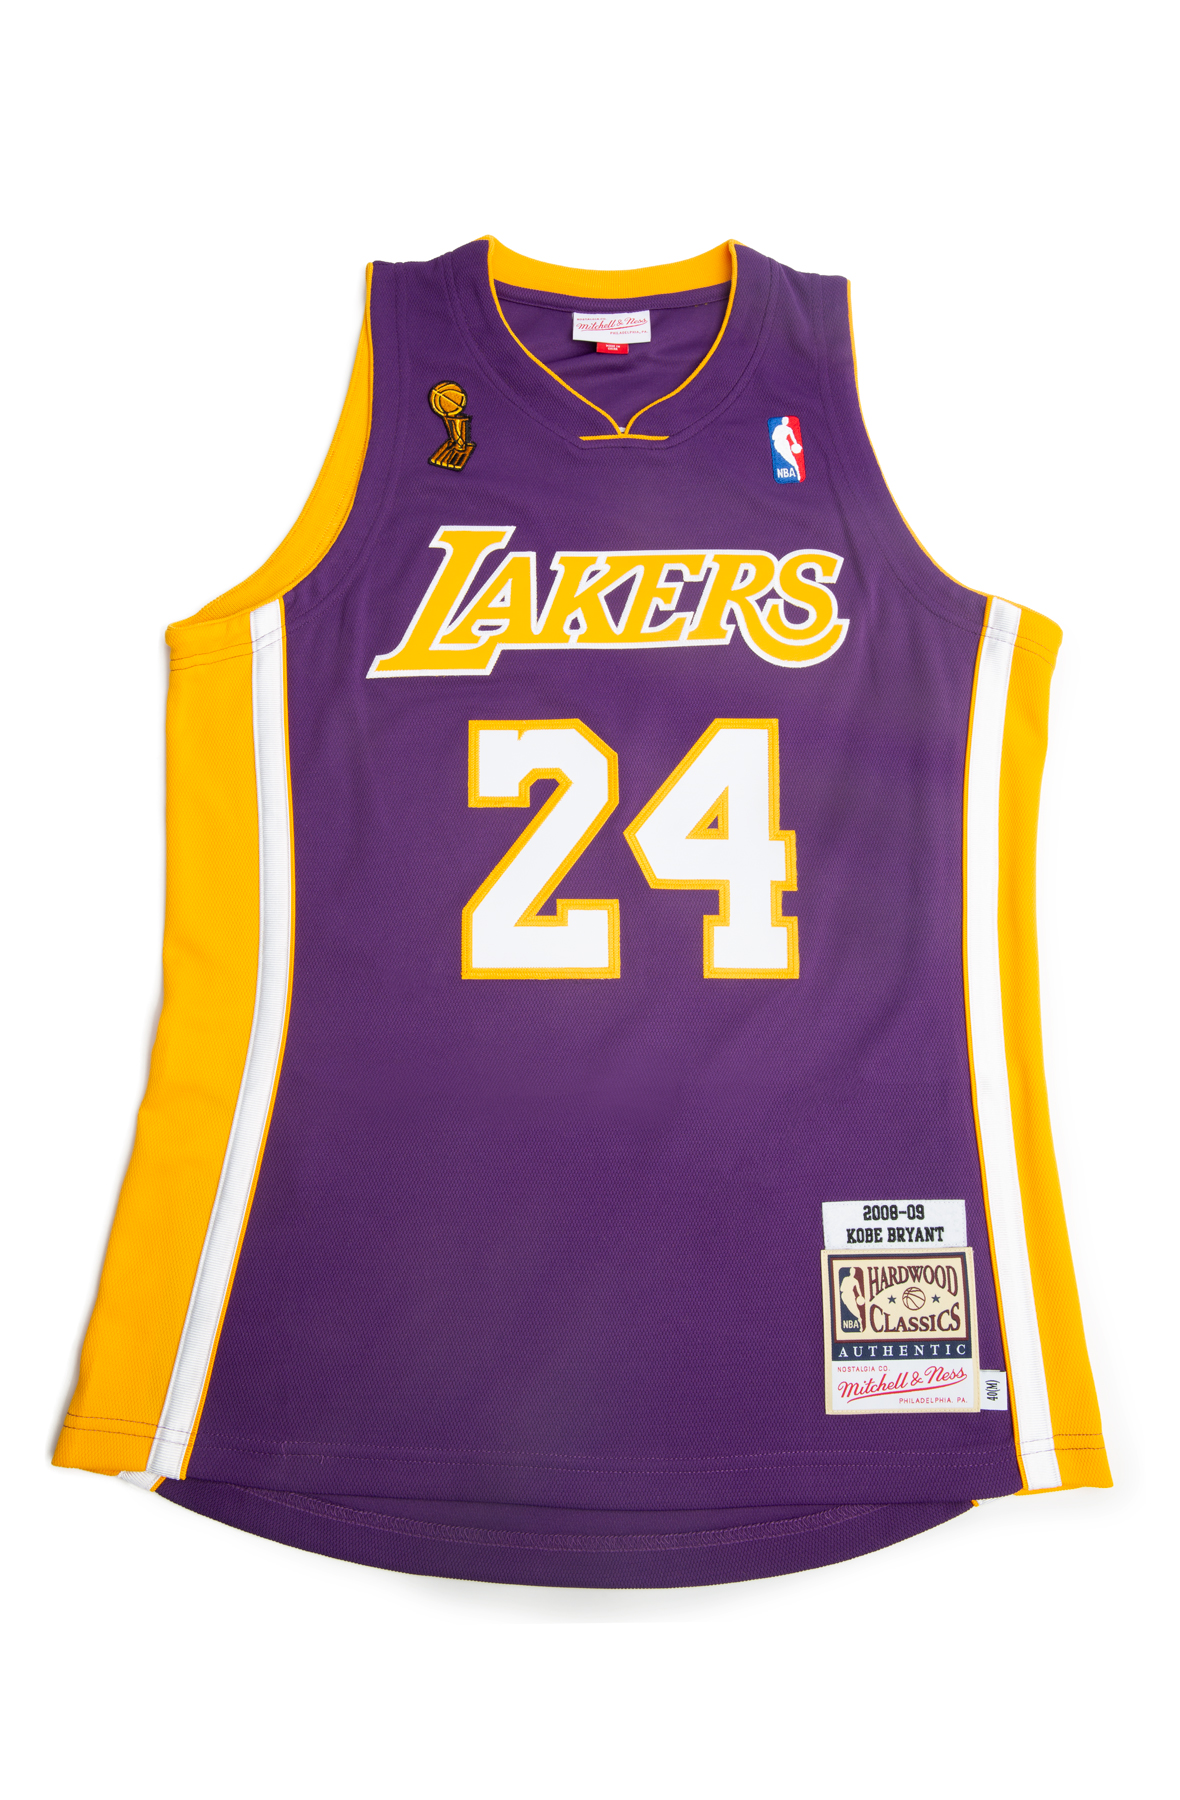 LOS ANGELES LAKERS KOBE BRYANT 2008-09 ROAD FINALS AUTHENTIC JERSEY